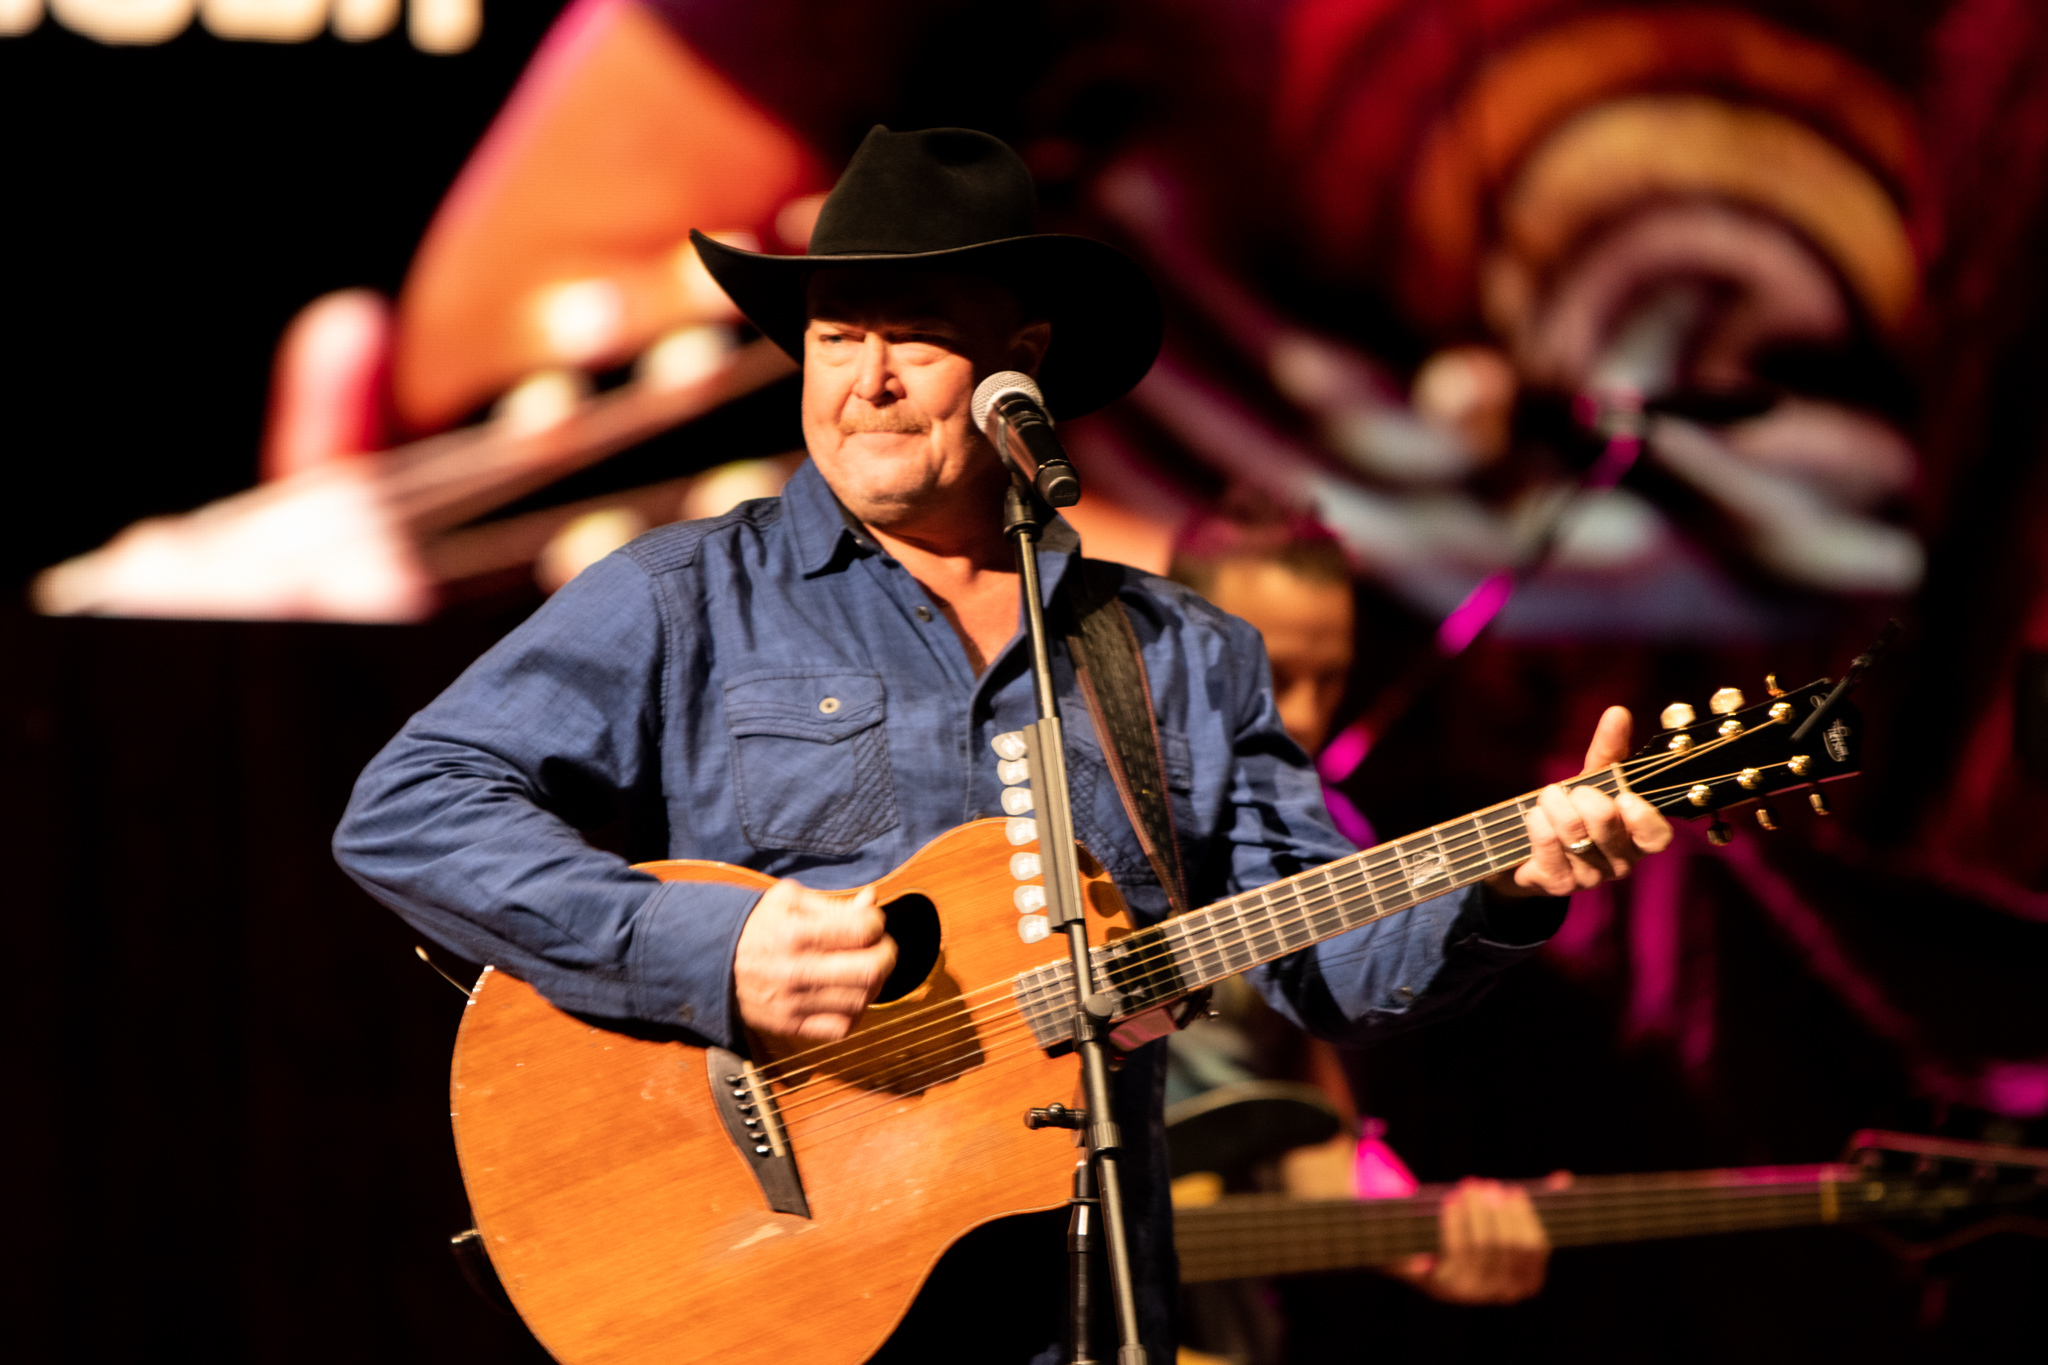 COUNTRY MUSIC ICON TRACY LAWRENCE ROLLS THROUGH THE WOLSTEIN CENTER IN CLEVELAND, OHIO